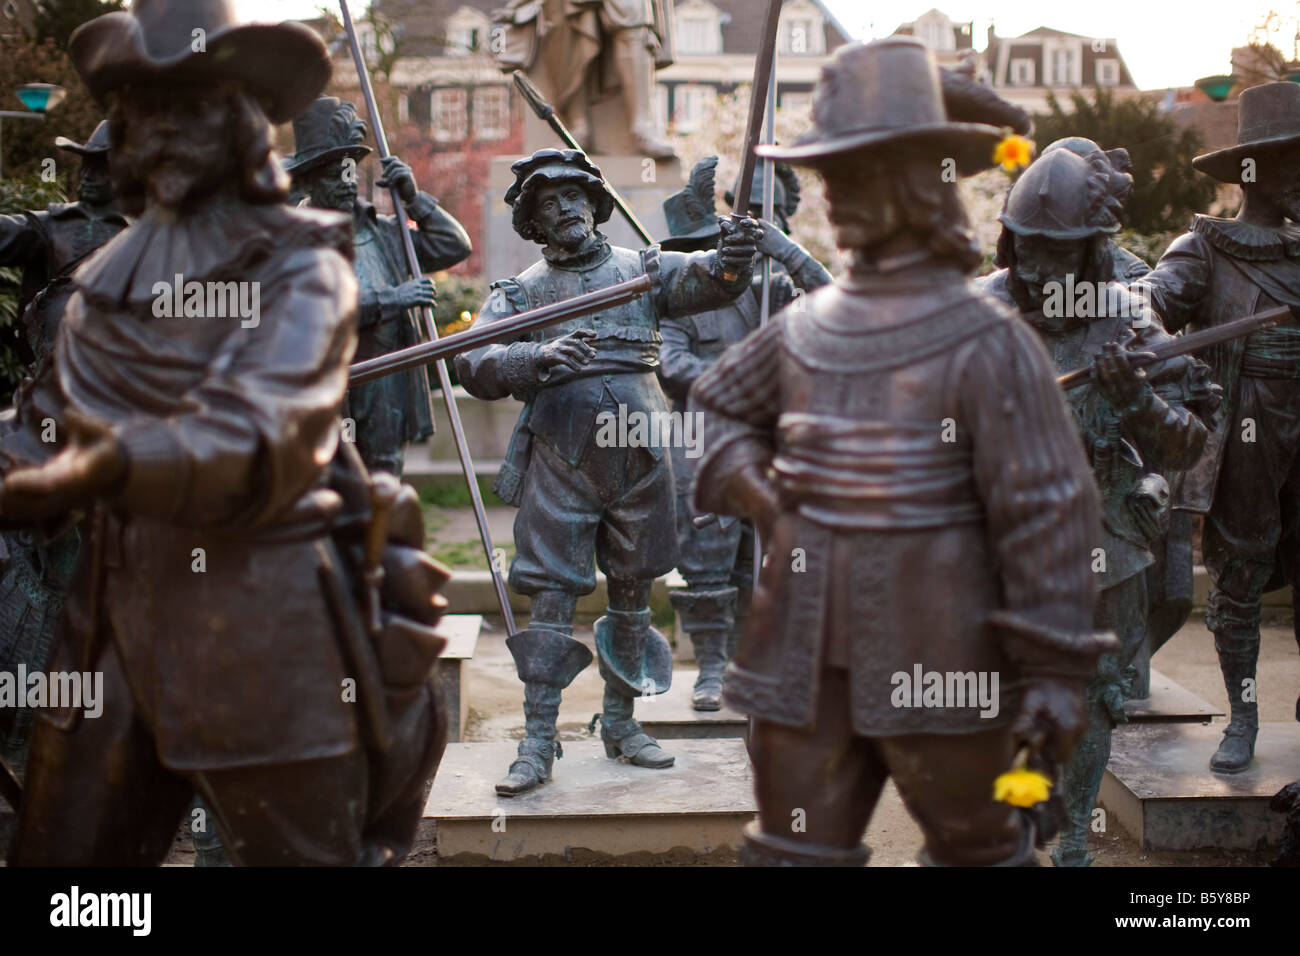 Statues depicting subjects from Rembrandt’s painting The Night Watch fill an area of Amsterdam’s Rembrandtplein Stock Photo